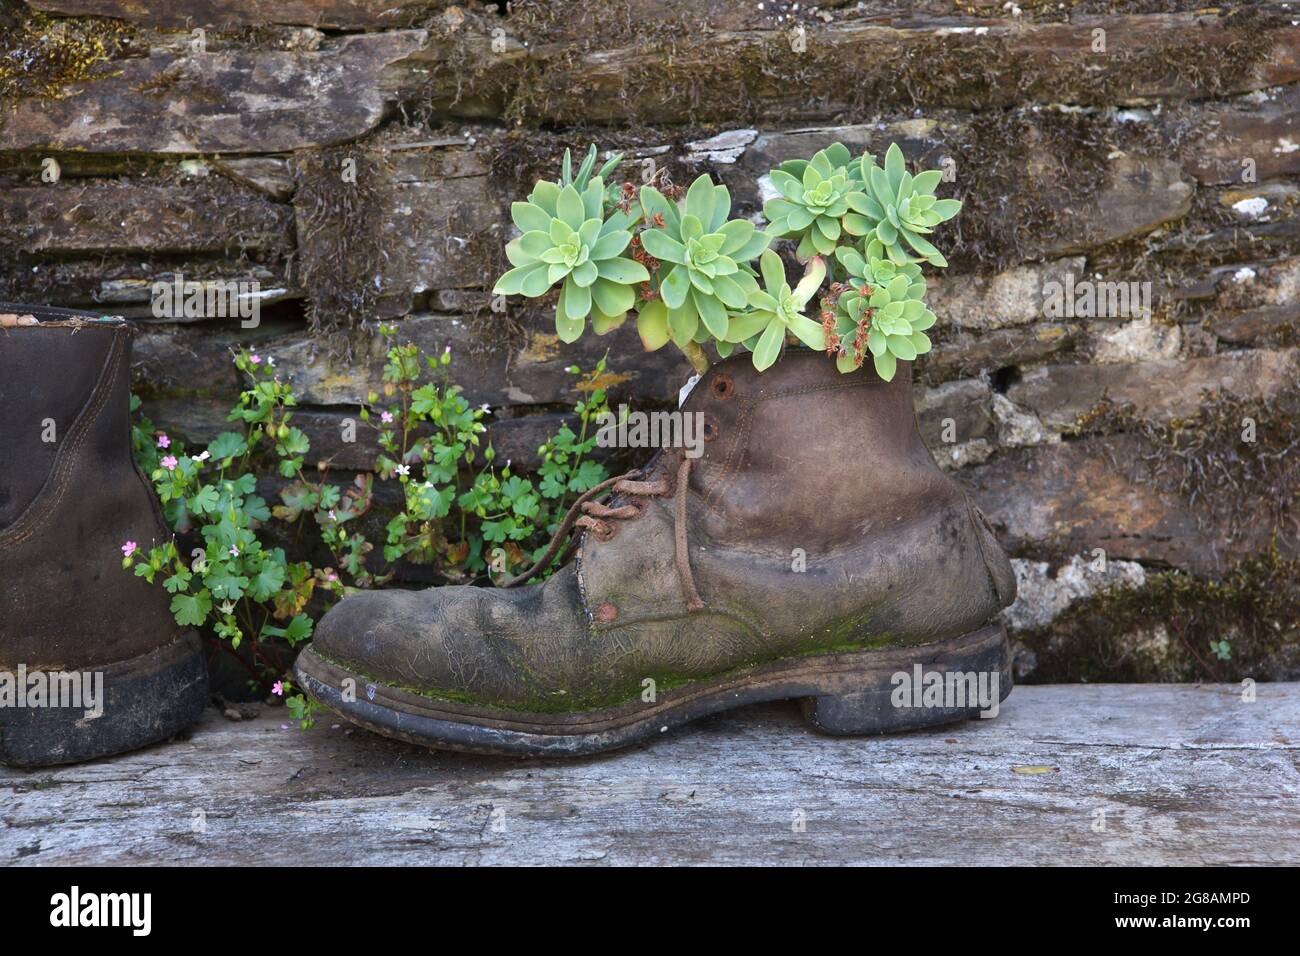 Camino de Santiago (Way of Saint James). Old pilgrim boot used as a flower pot for succulents in the pilgrim shelter (albergue) in the village of Montan in Galicia, Spain. The French route of the Camino de Santiago goes through this village on the way from Triacastela to Sarria. Stock Photo